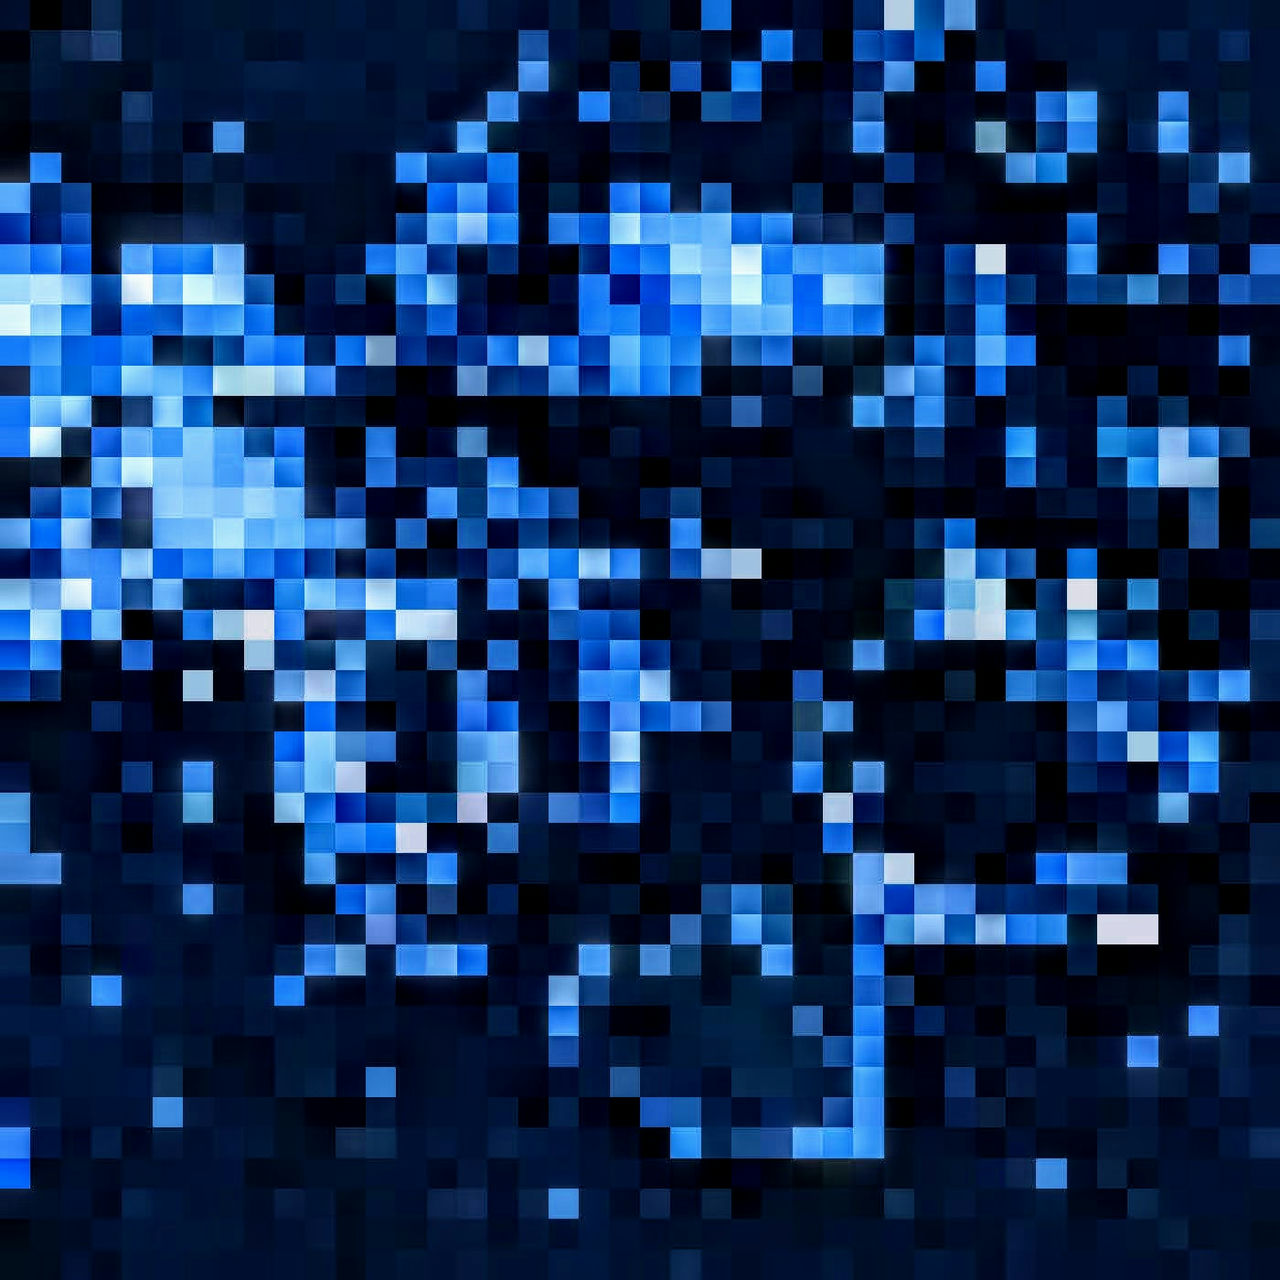 A whole bunch of blue pixel squares